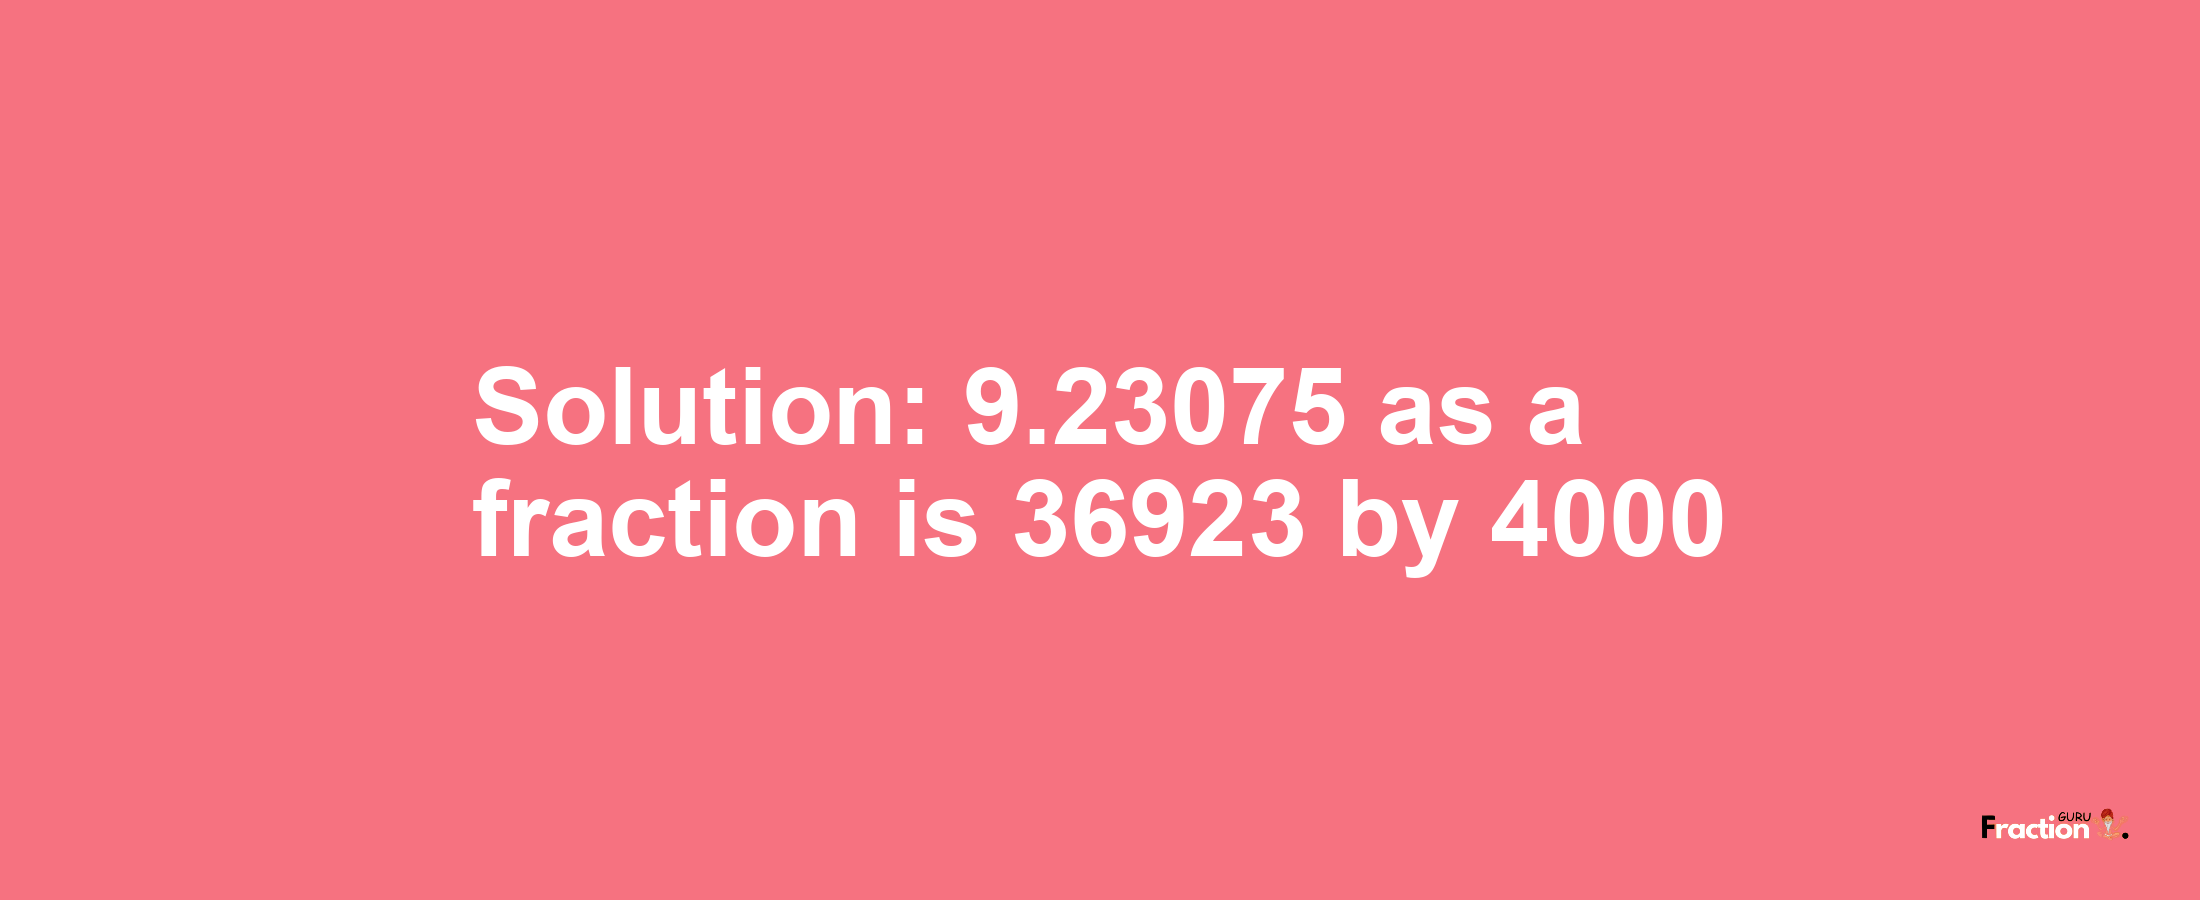 Solution:9.23075 as a fraction is 36923/4000